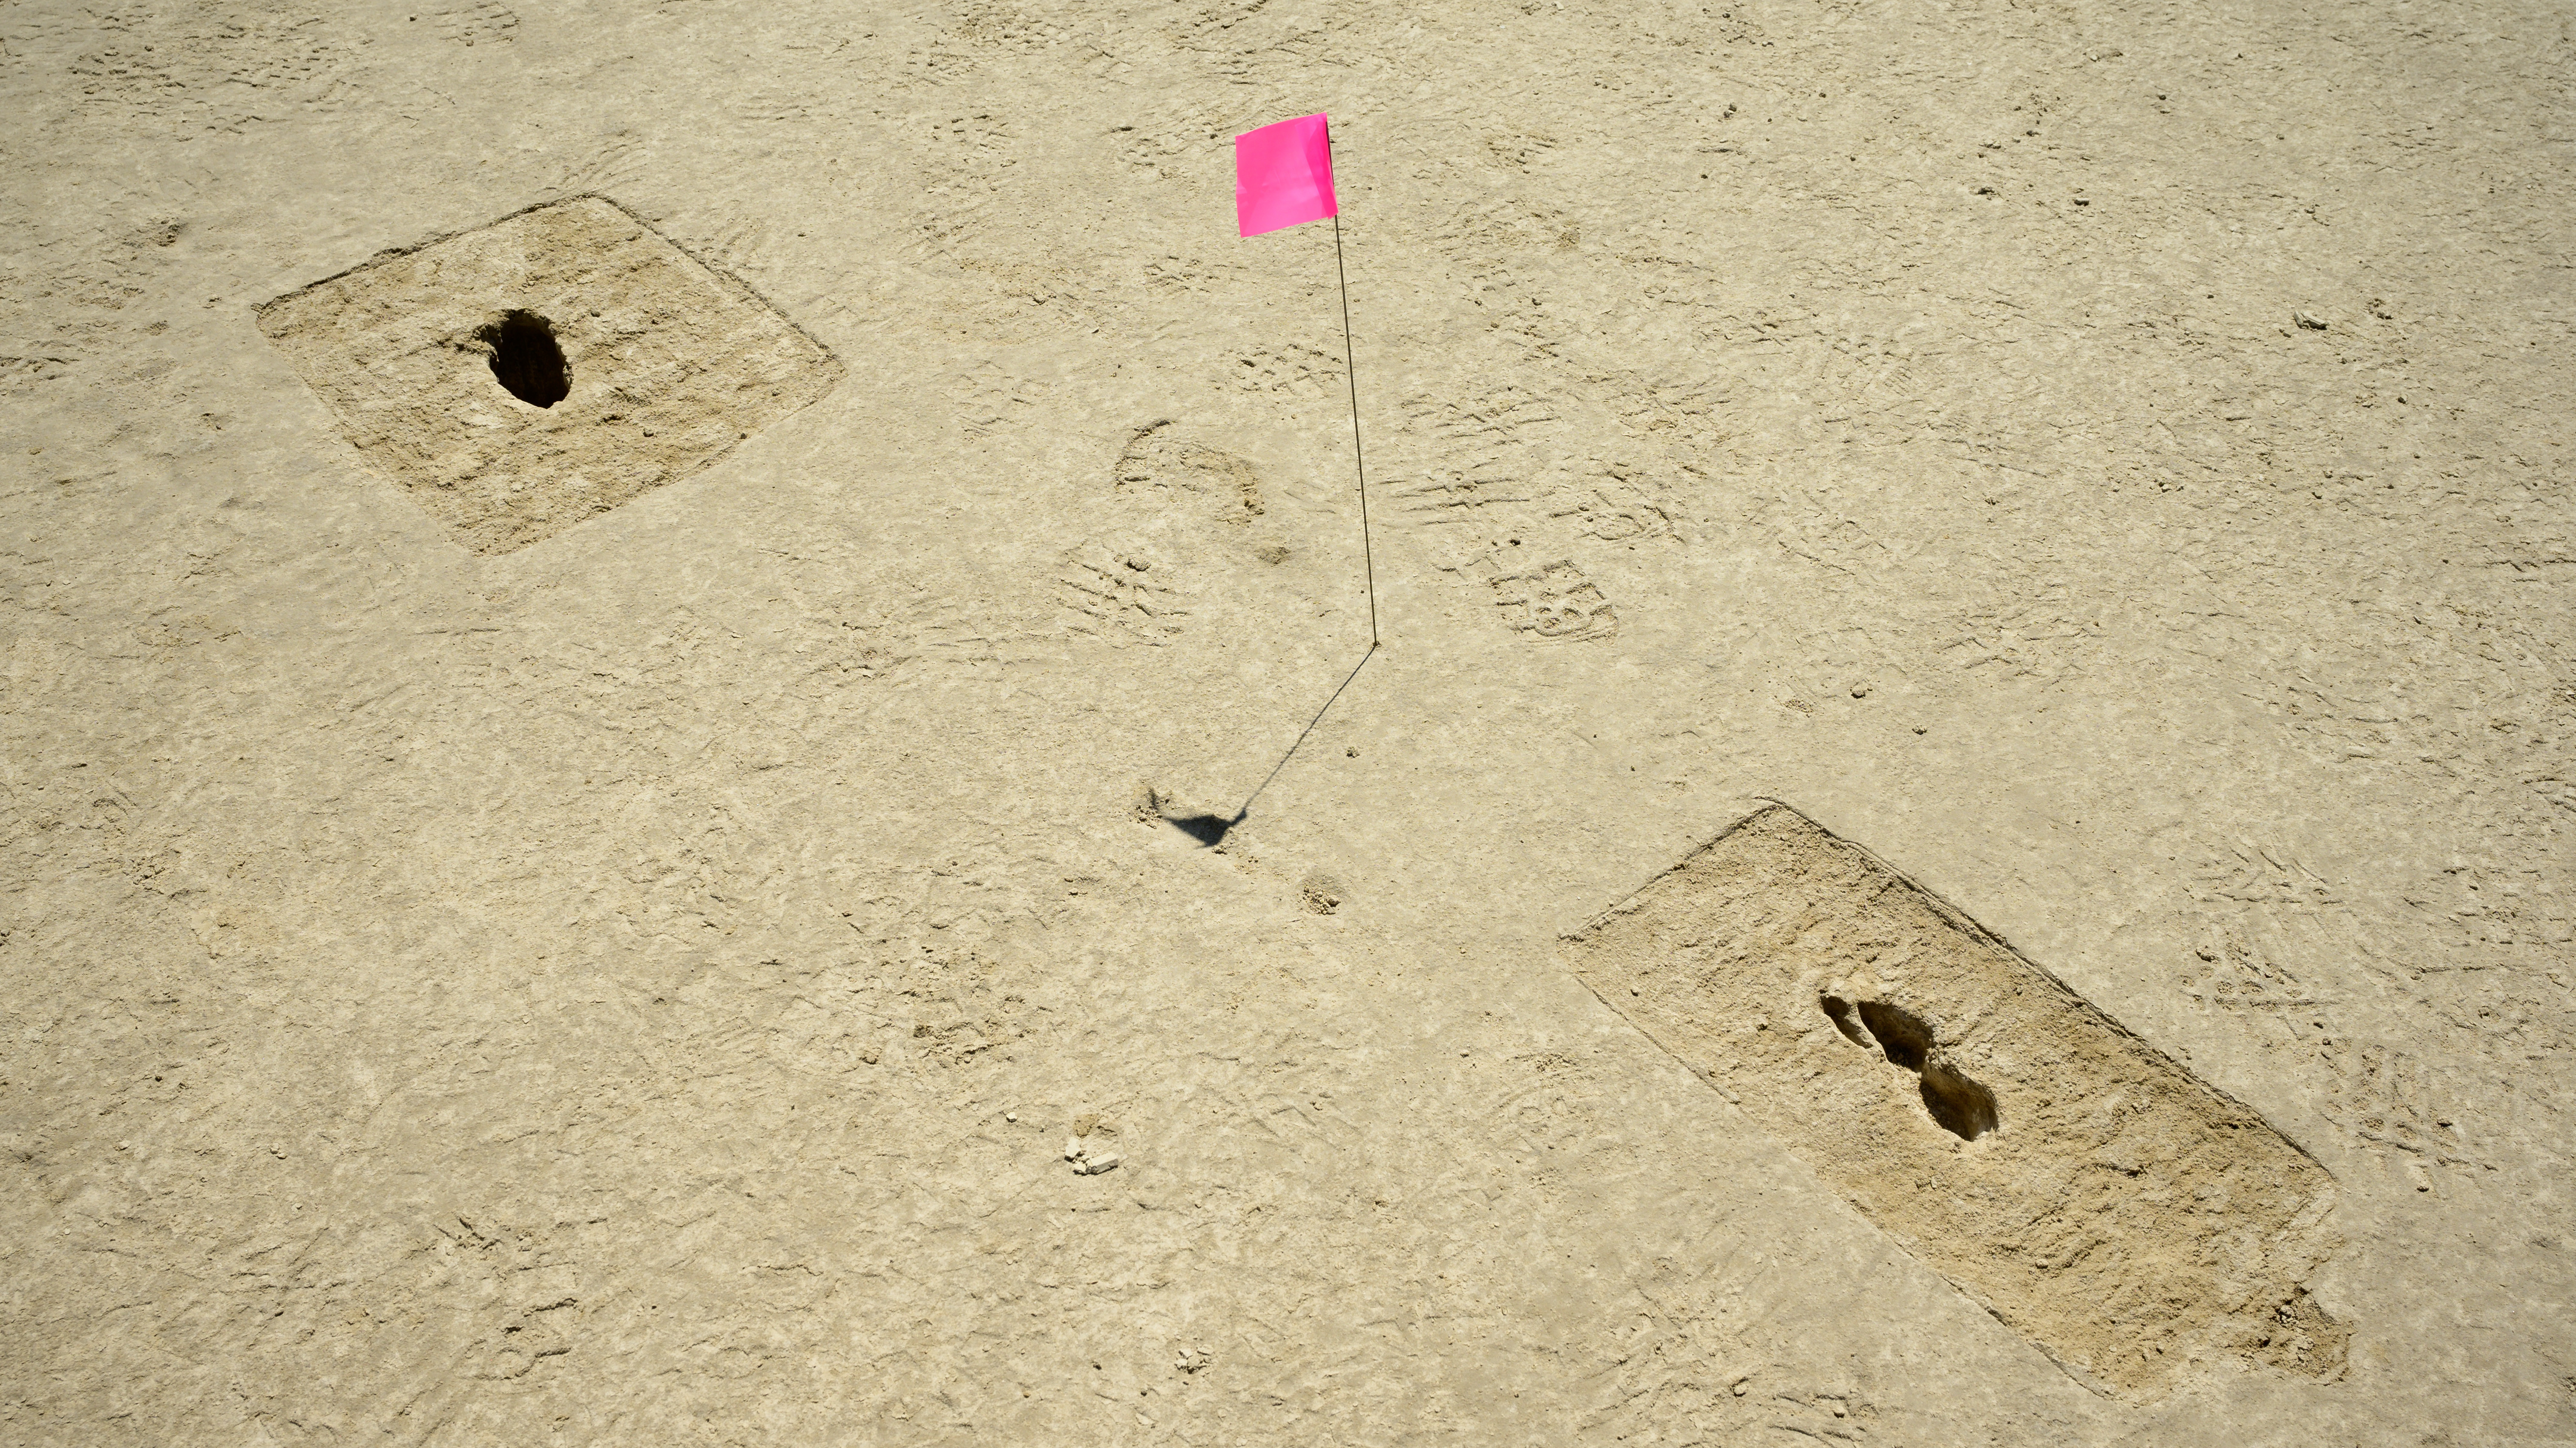 Two of the ghost footprints uncovered in Utah's great Salt Lake Desert.